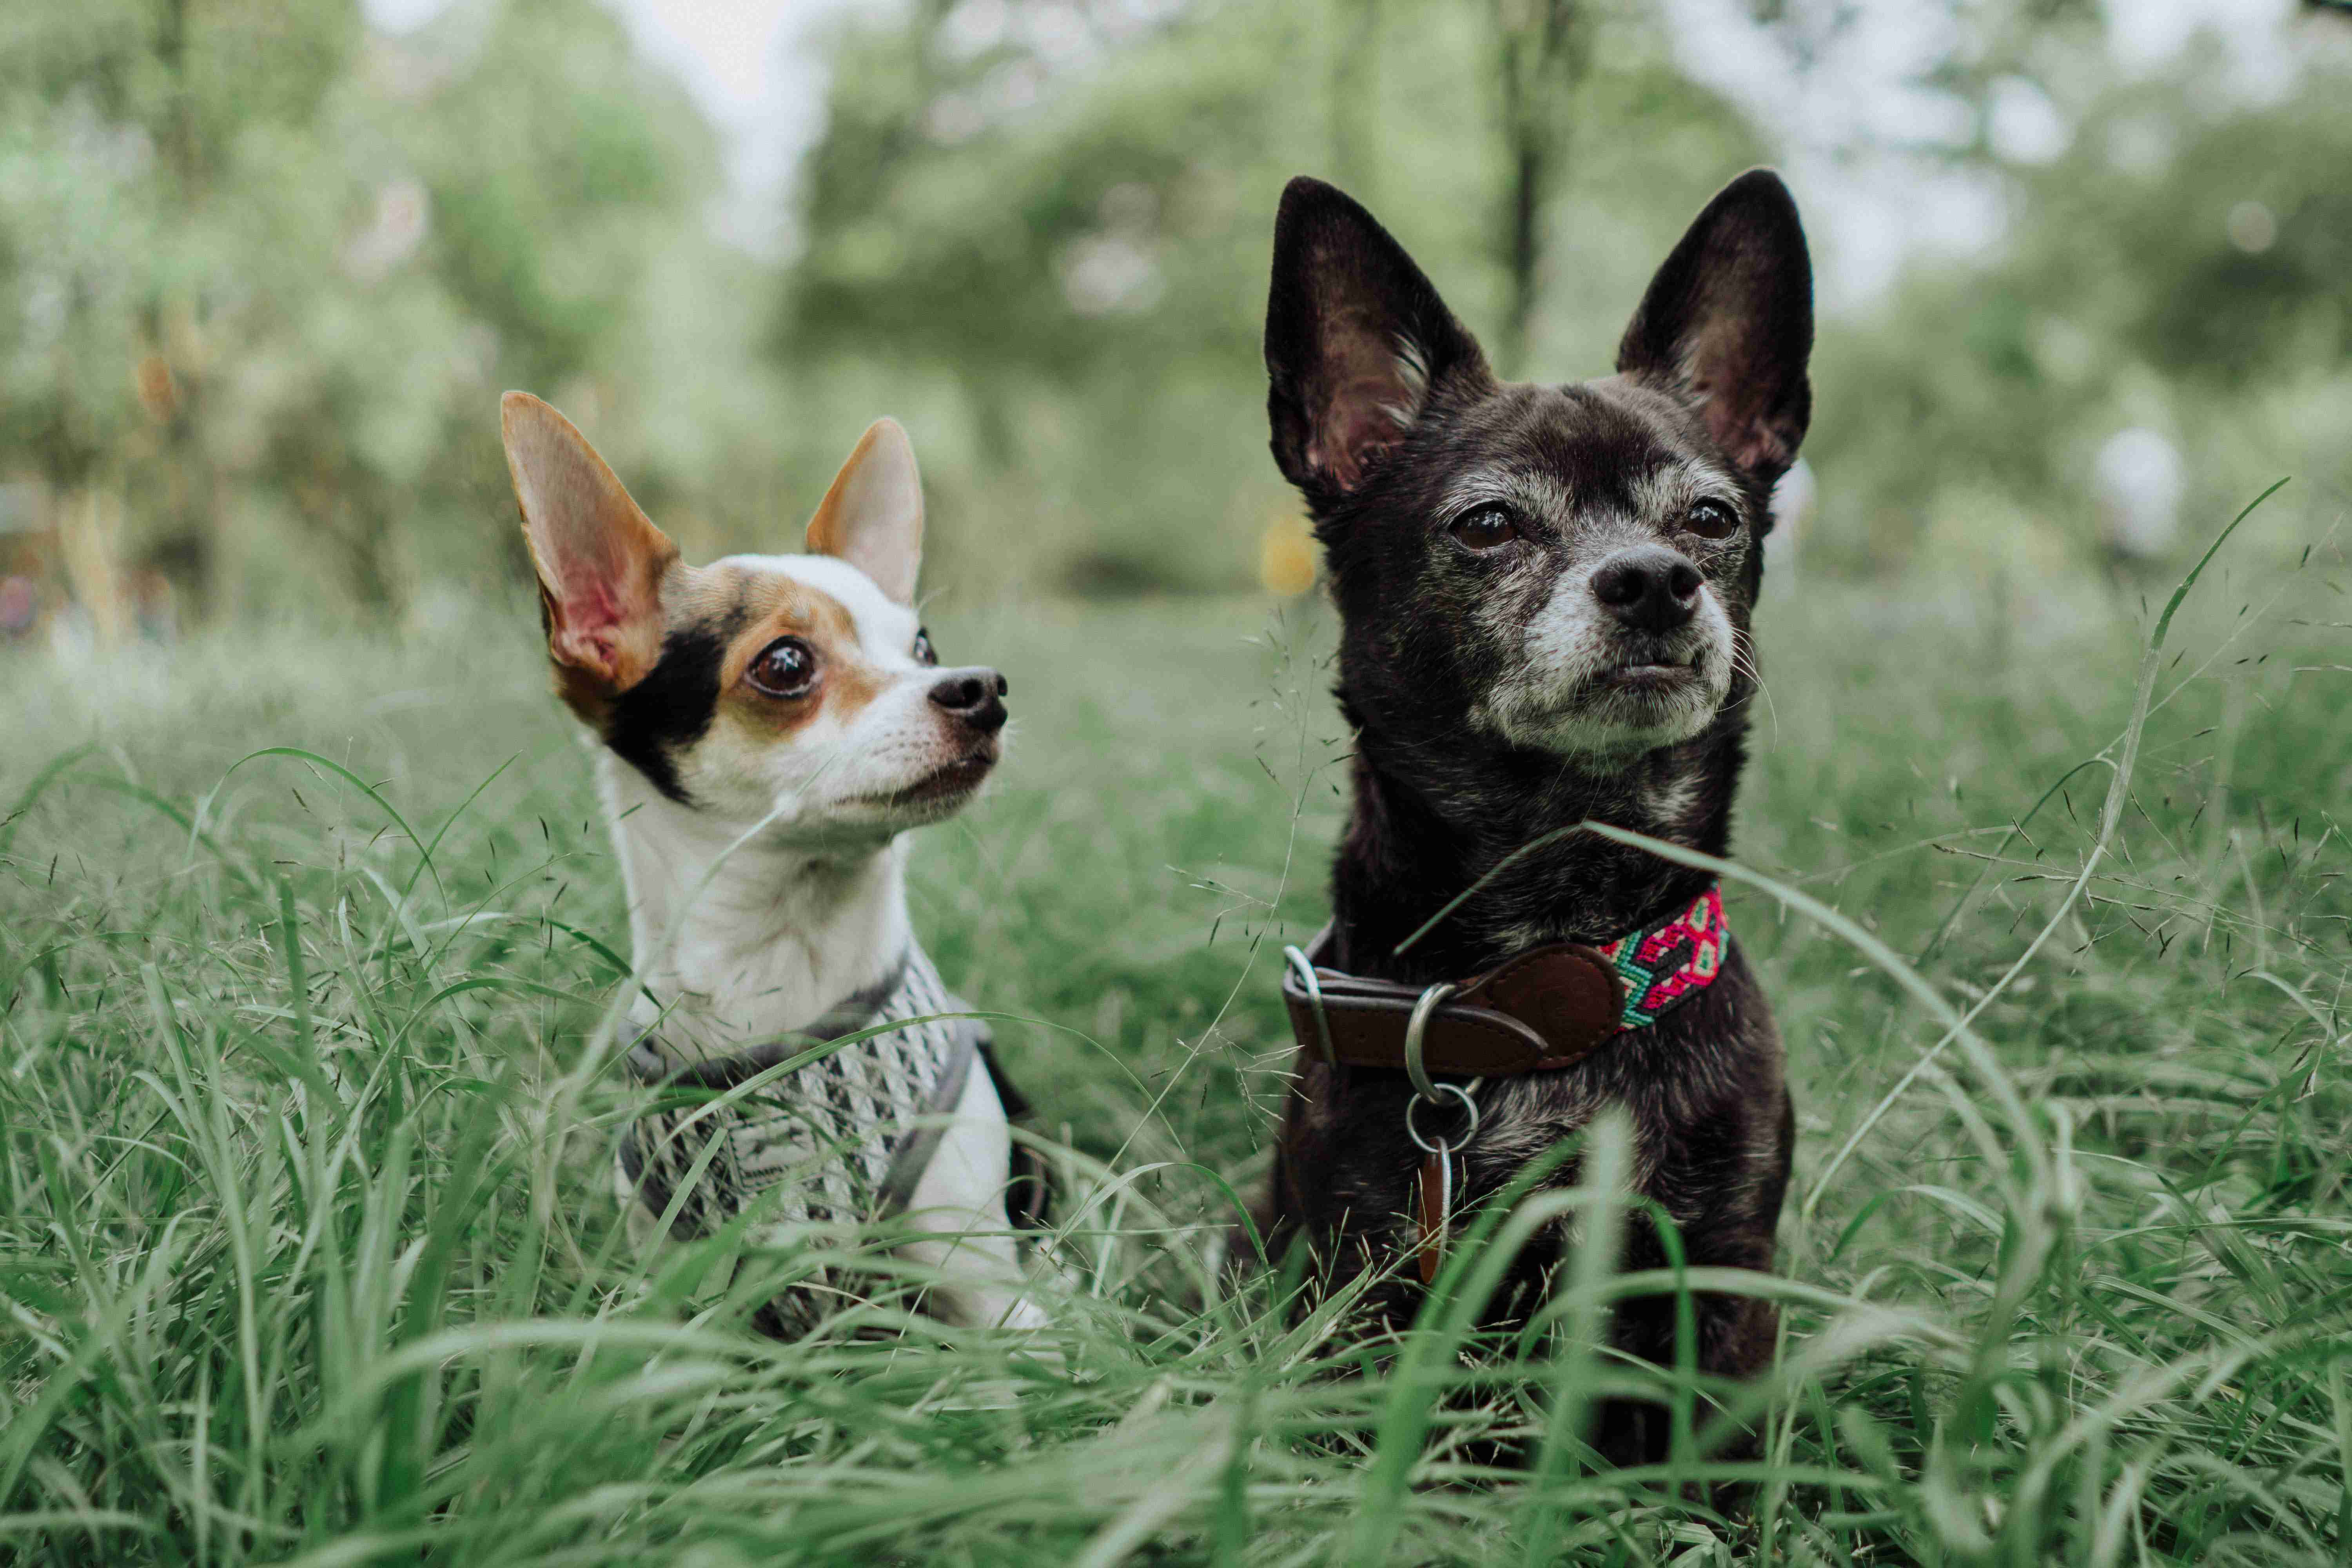 Are there any warning signs that a Chihuahua's anger is escalating and could lead to aggression?